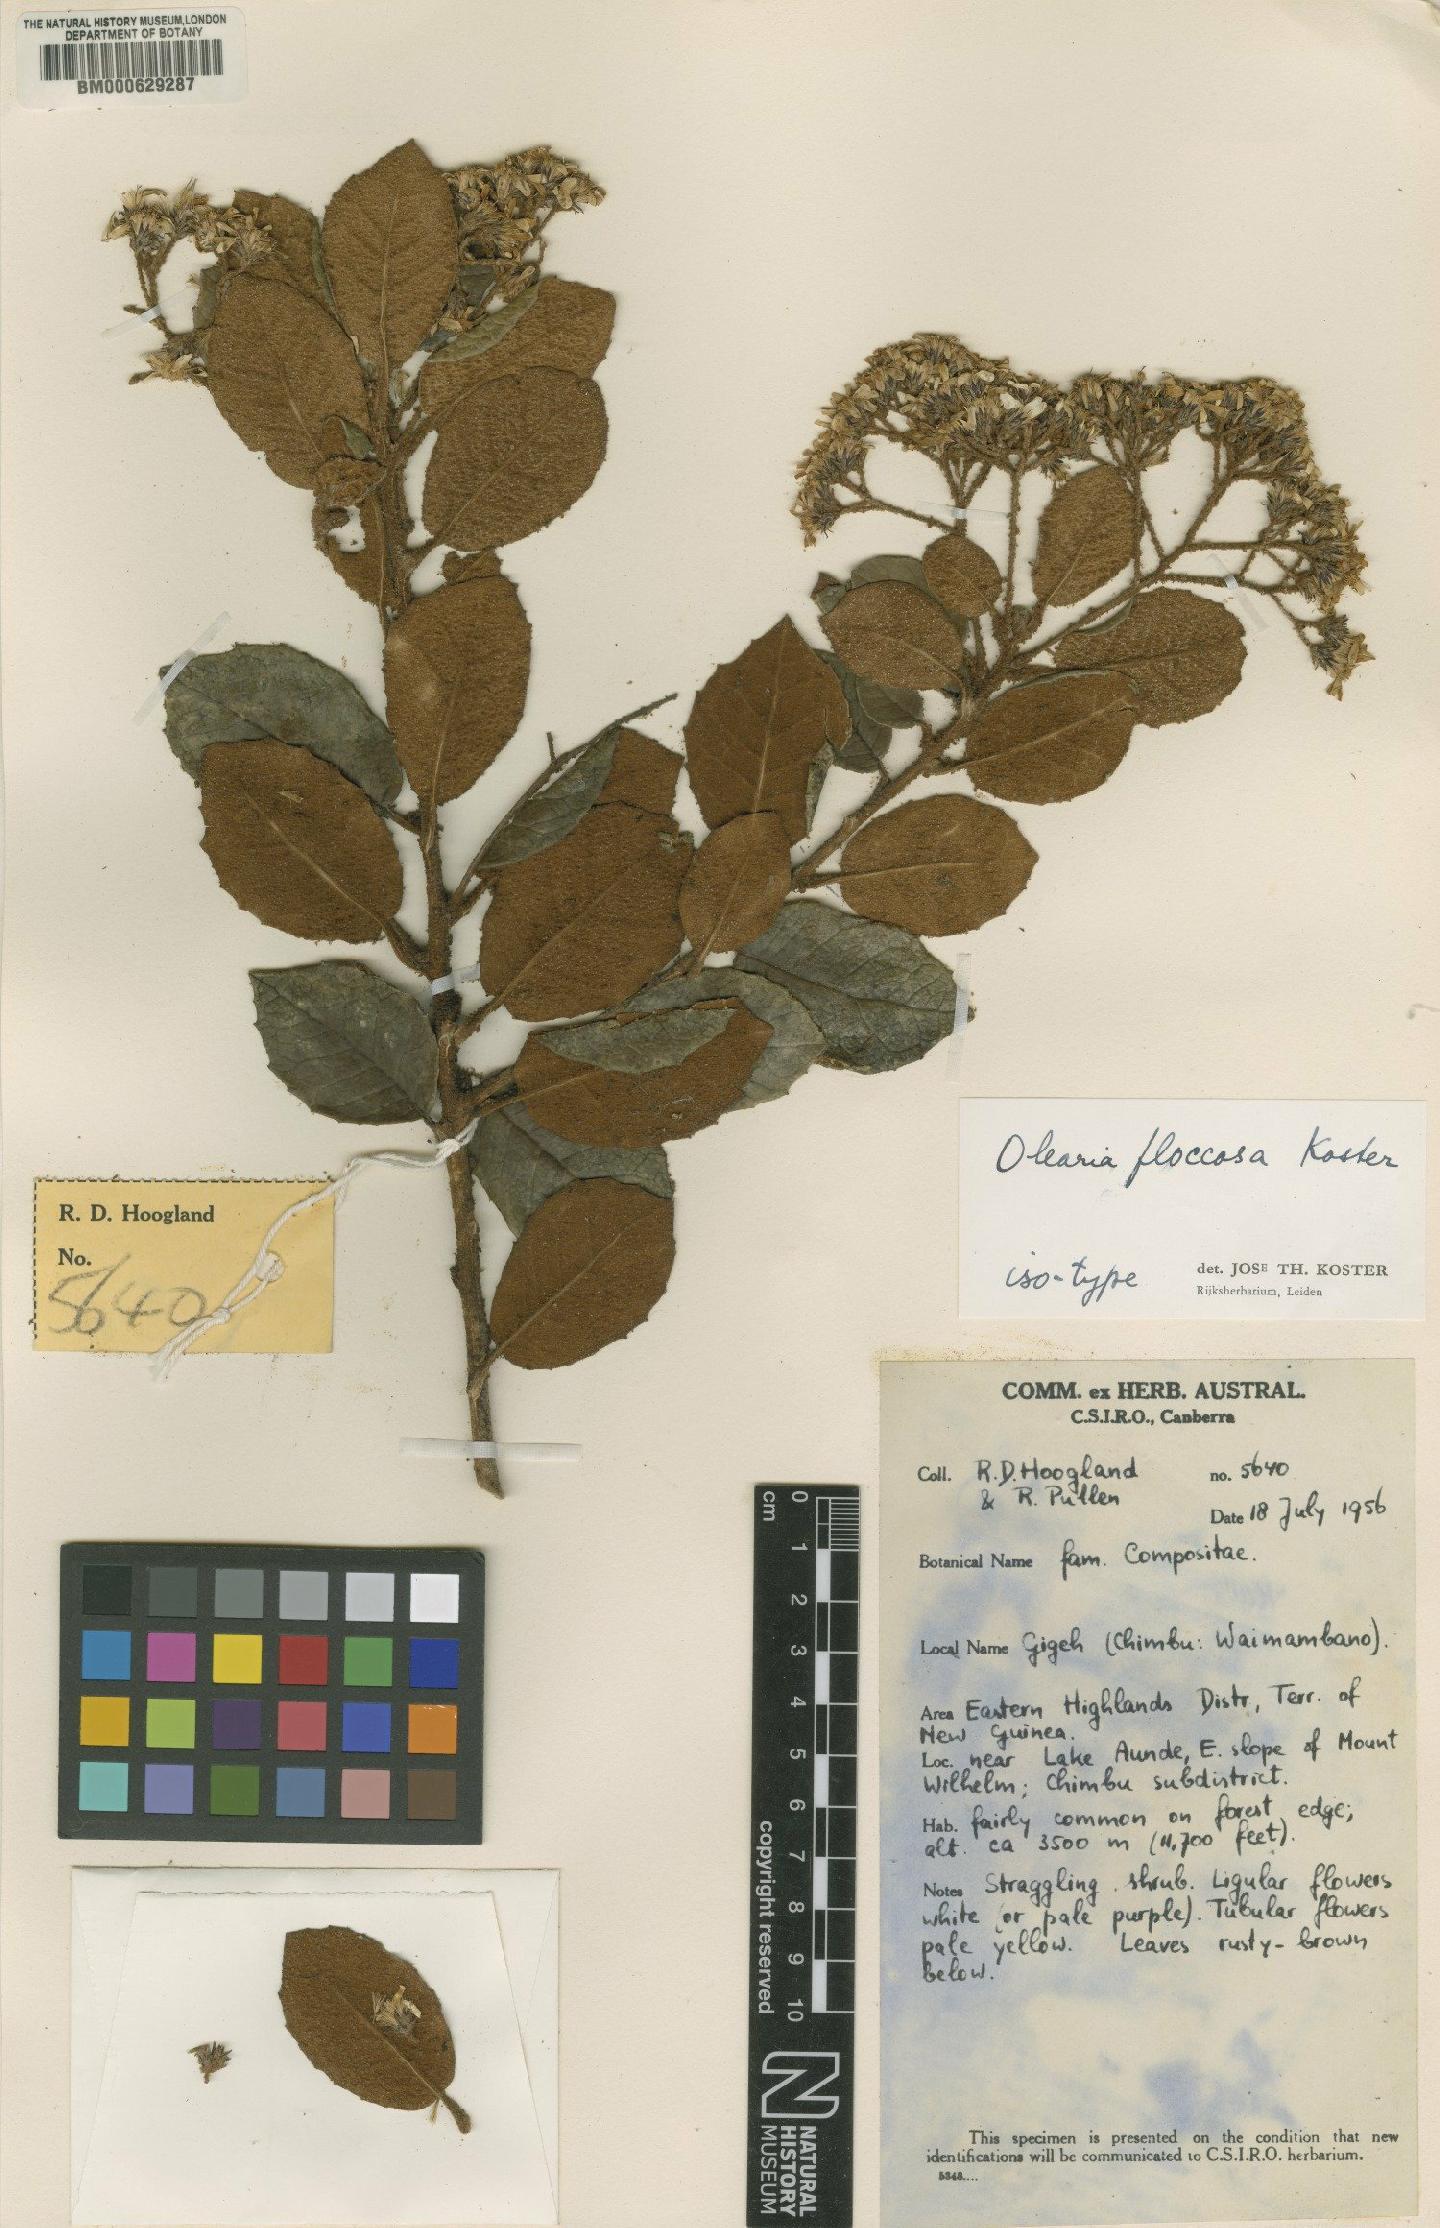 To NHMUK collection (Olearia floccosa Koster; Isotype; NHMUK:ecatalogue:4986167)